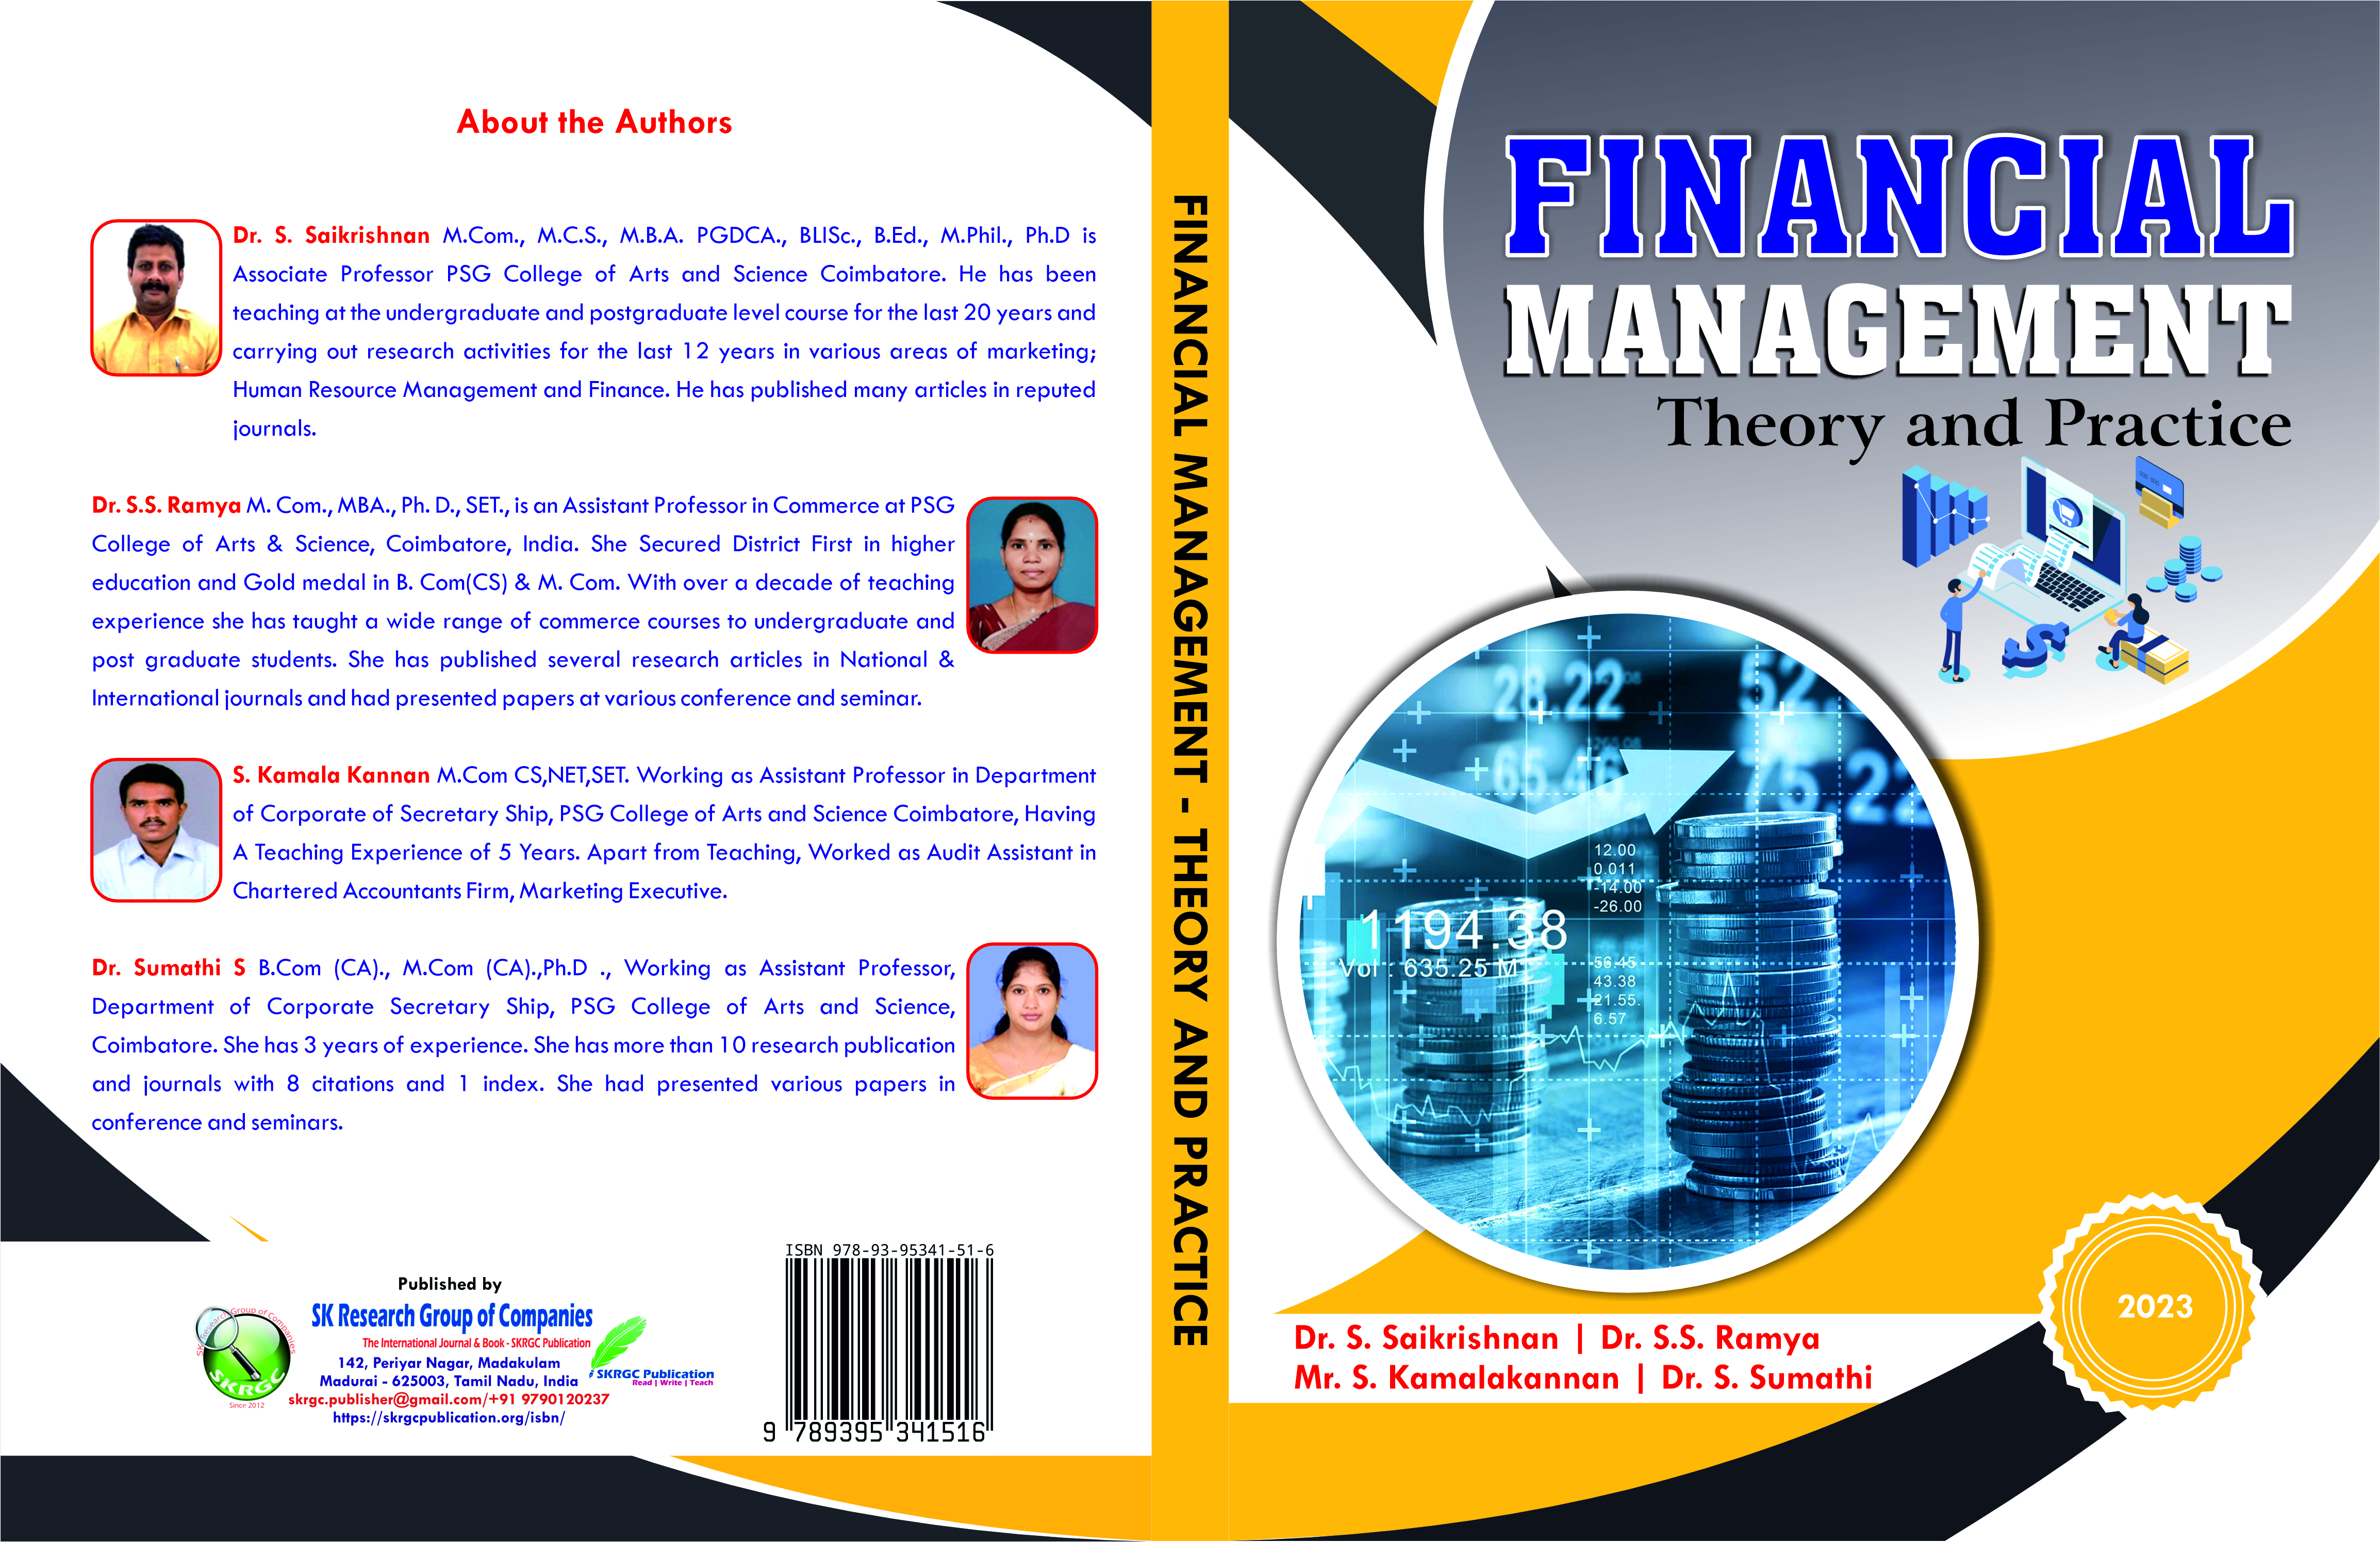 FINANCIAL MANAGEMENT – THEORY AND PRACTICE